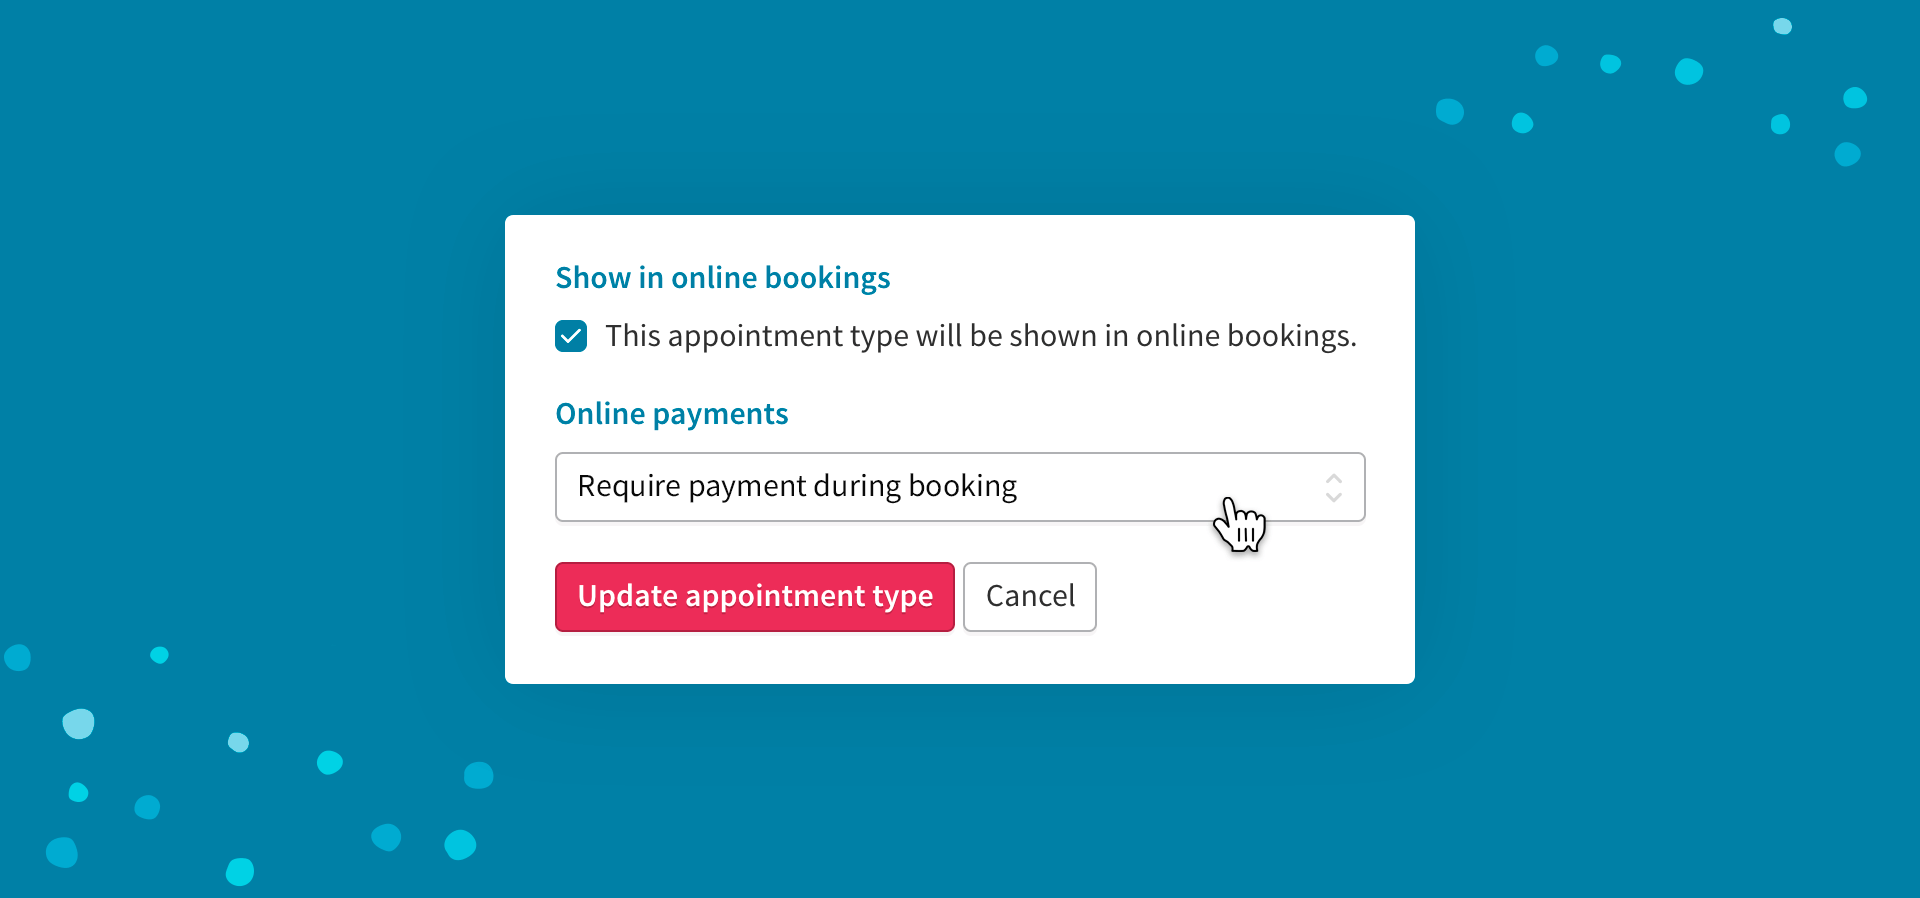 A screenshot showing a new addition to online payments, giving the option to require payment during booking.